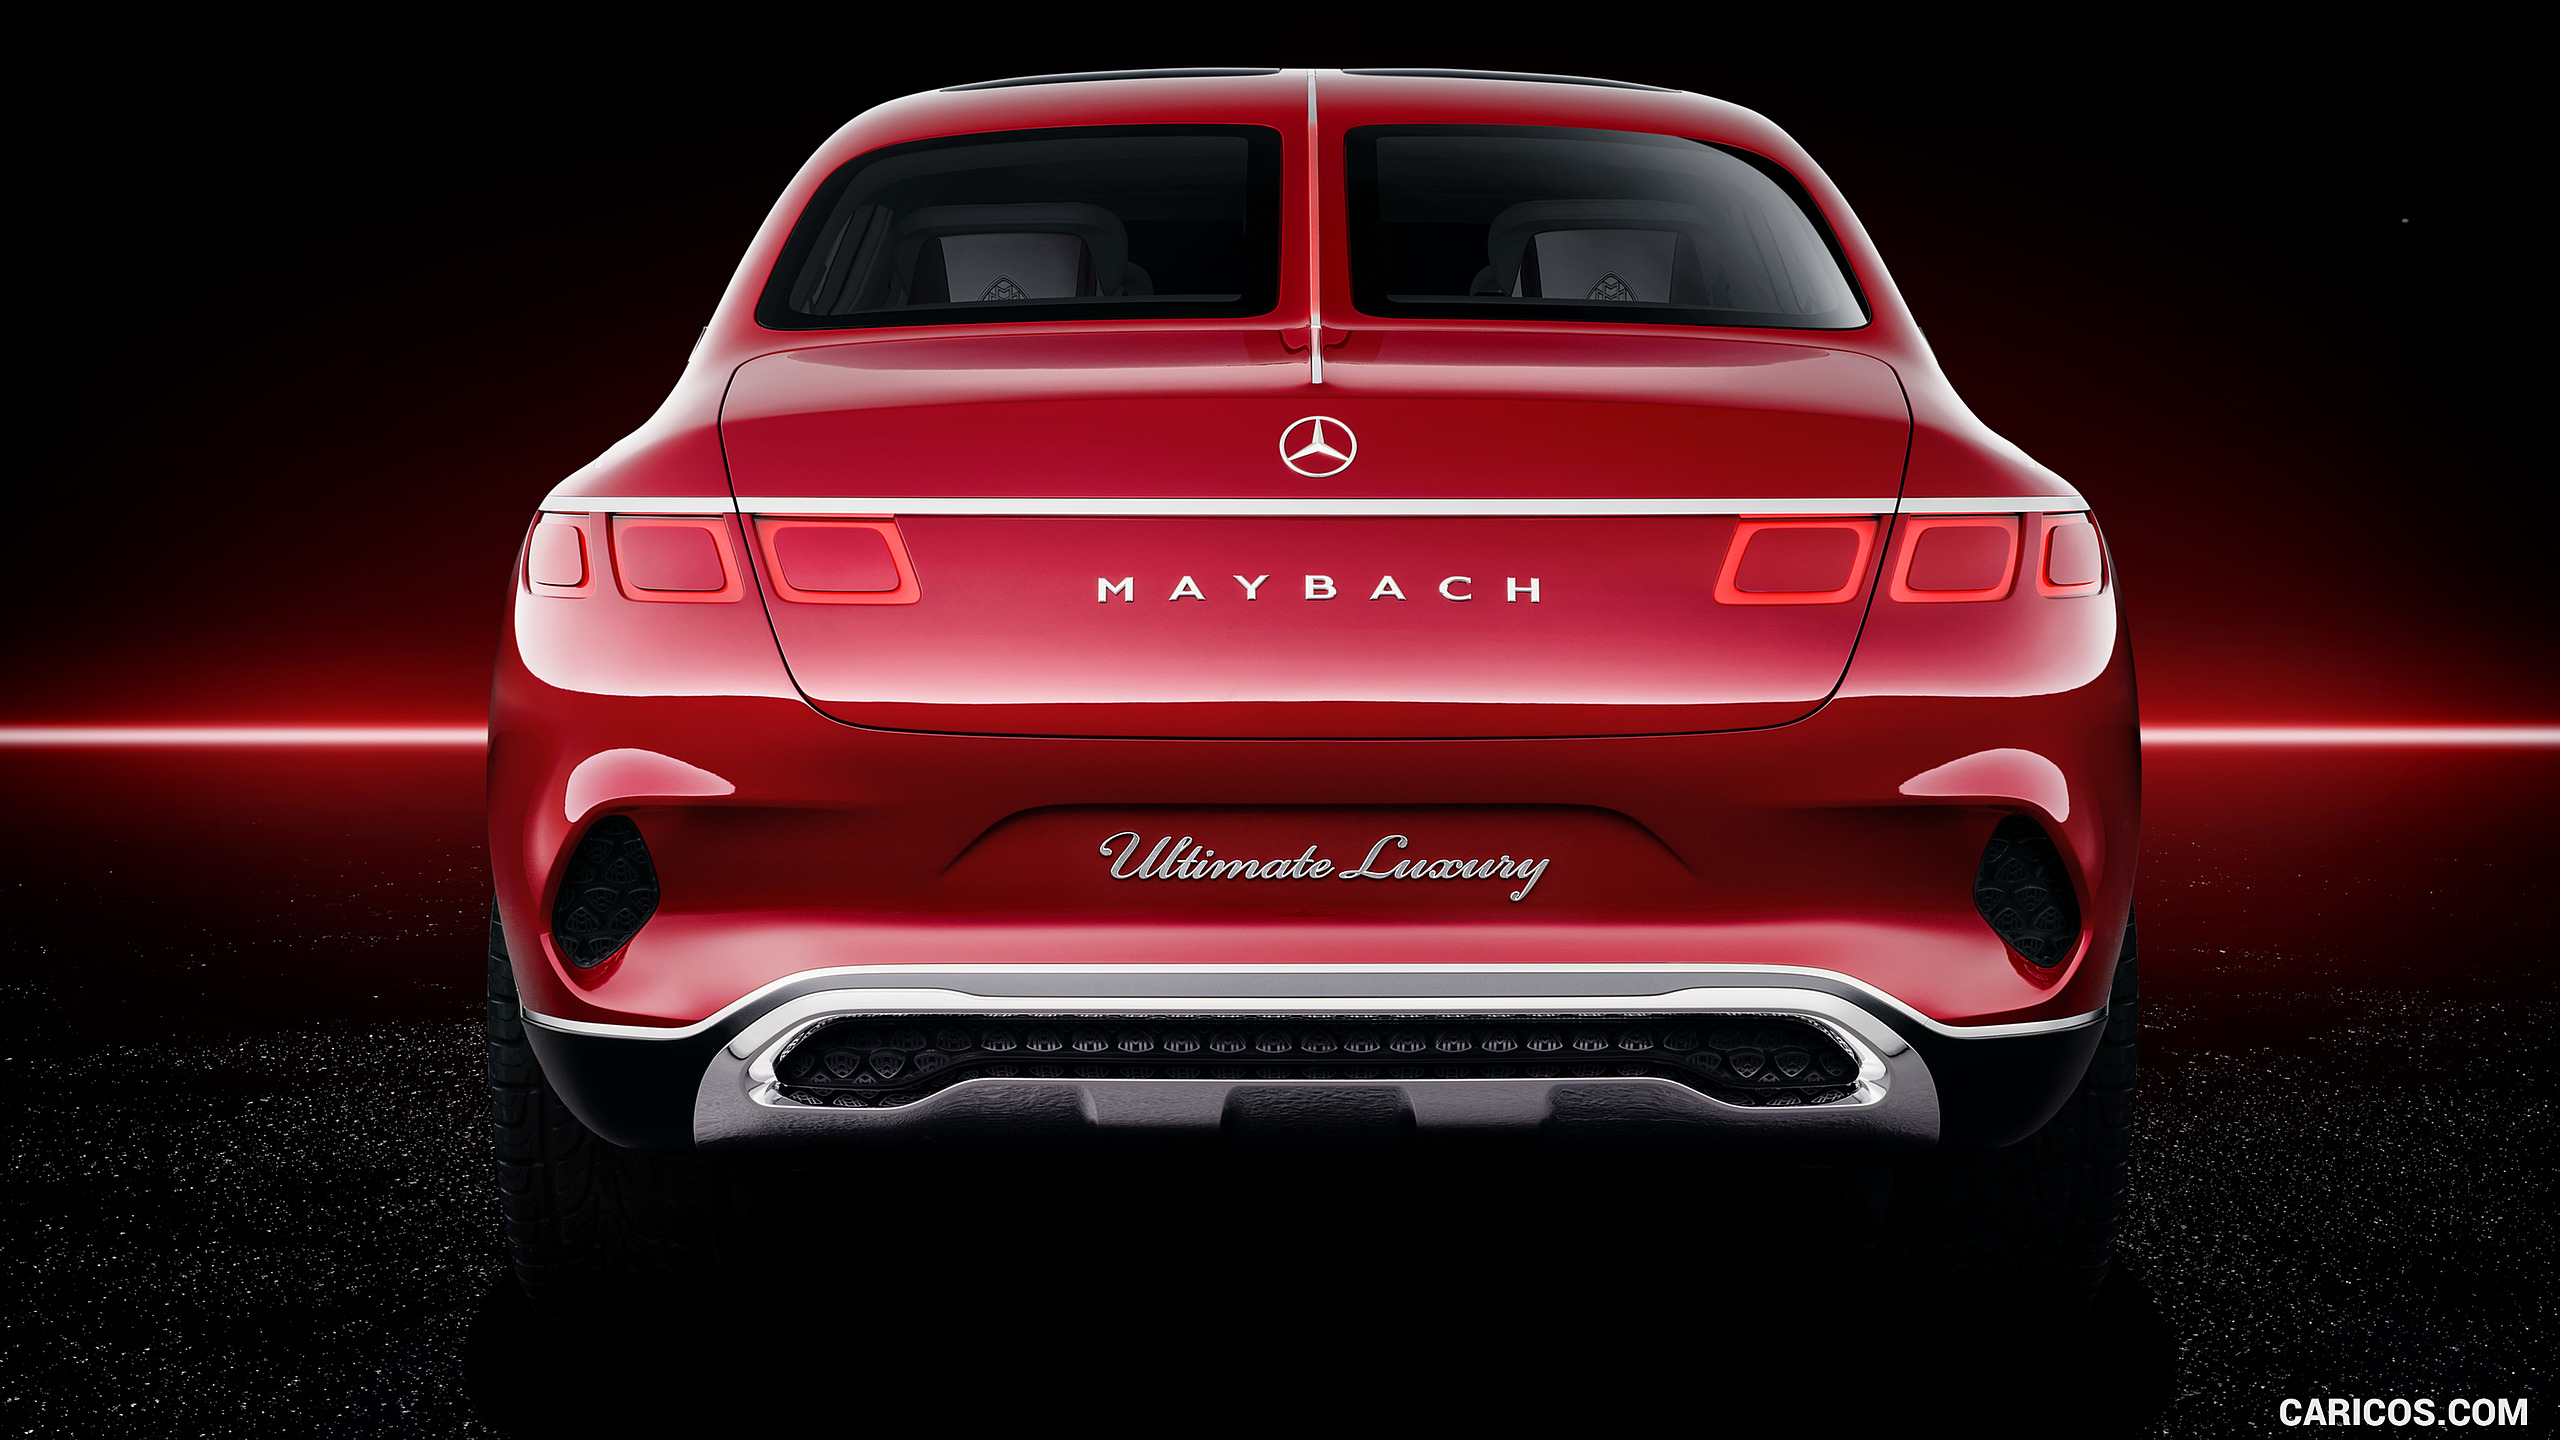 2018 Mercedes-Maybach Vision Ultimate Luxury SUV Concept - Rear, #22 of 41